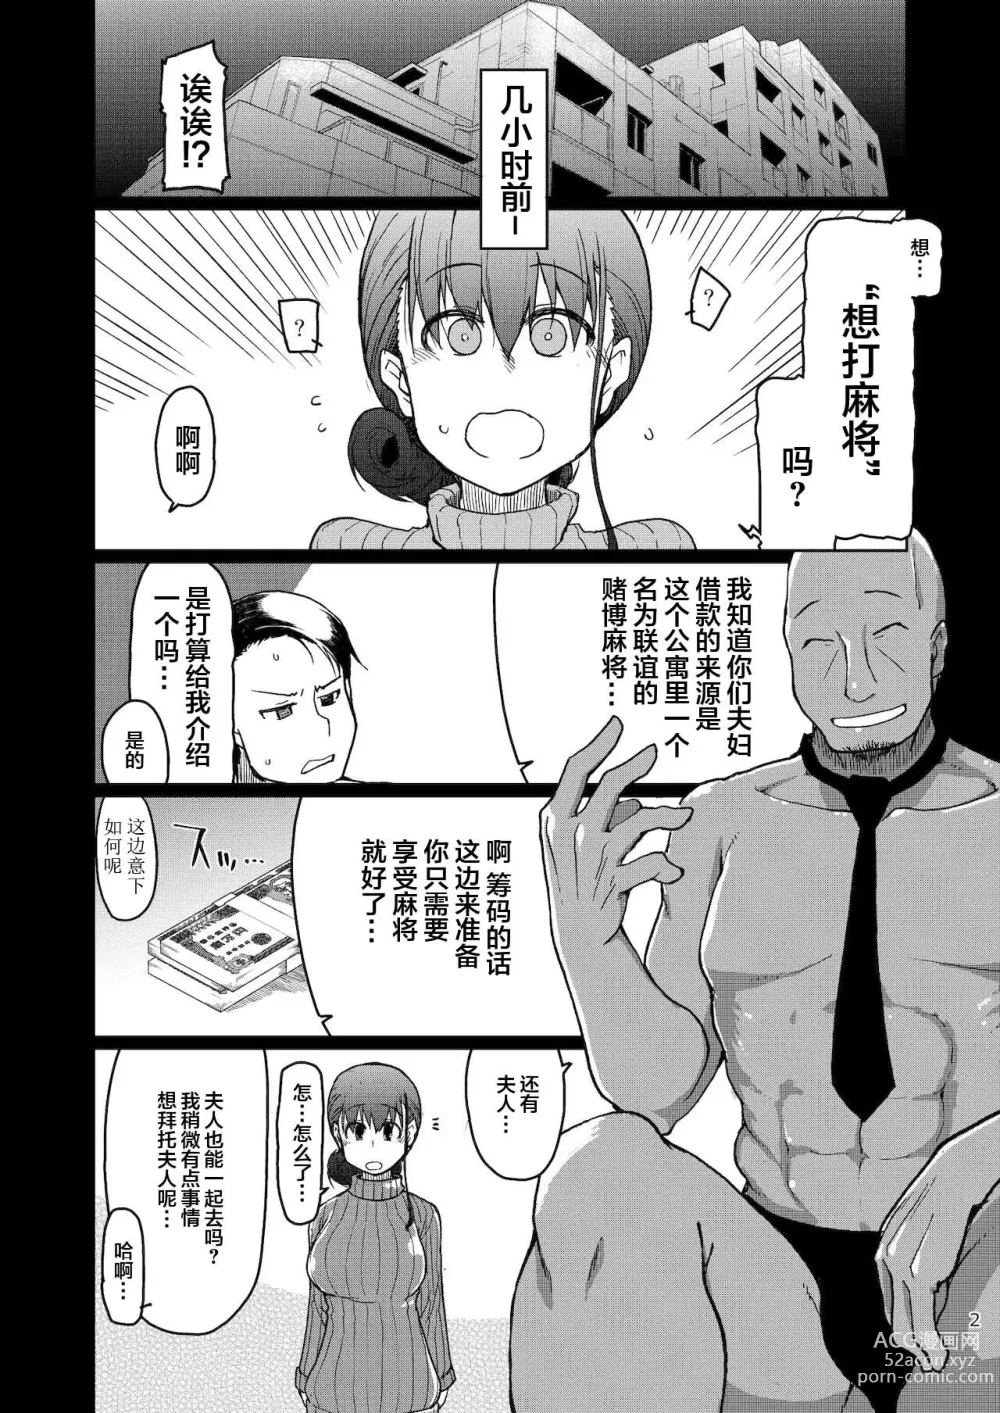 Page 3 of doujinshi SYG -Sell your girlfriend-2